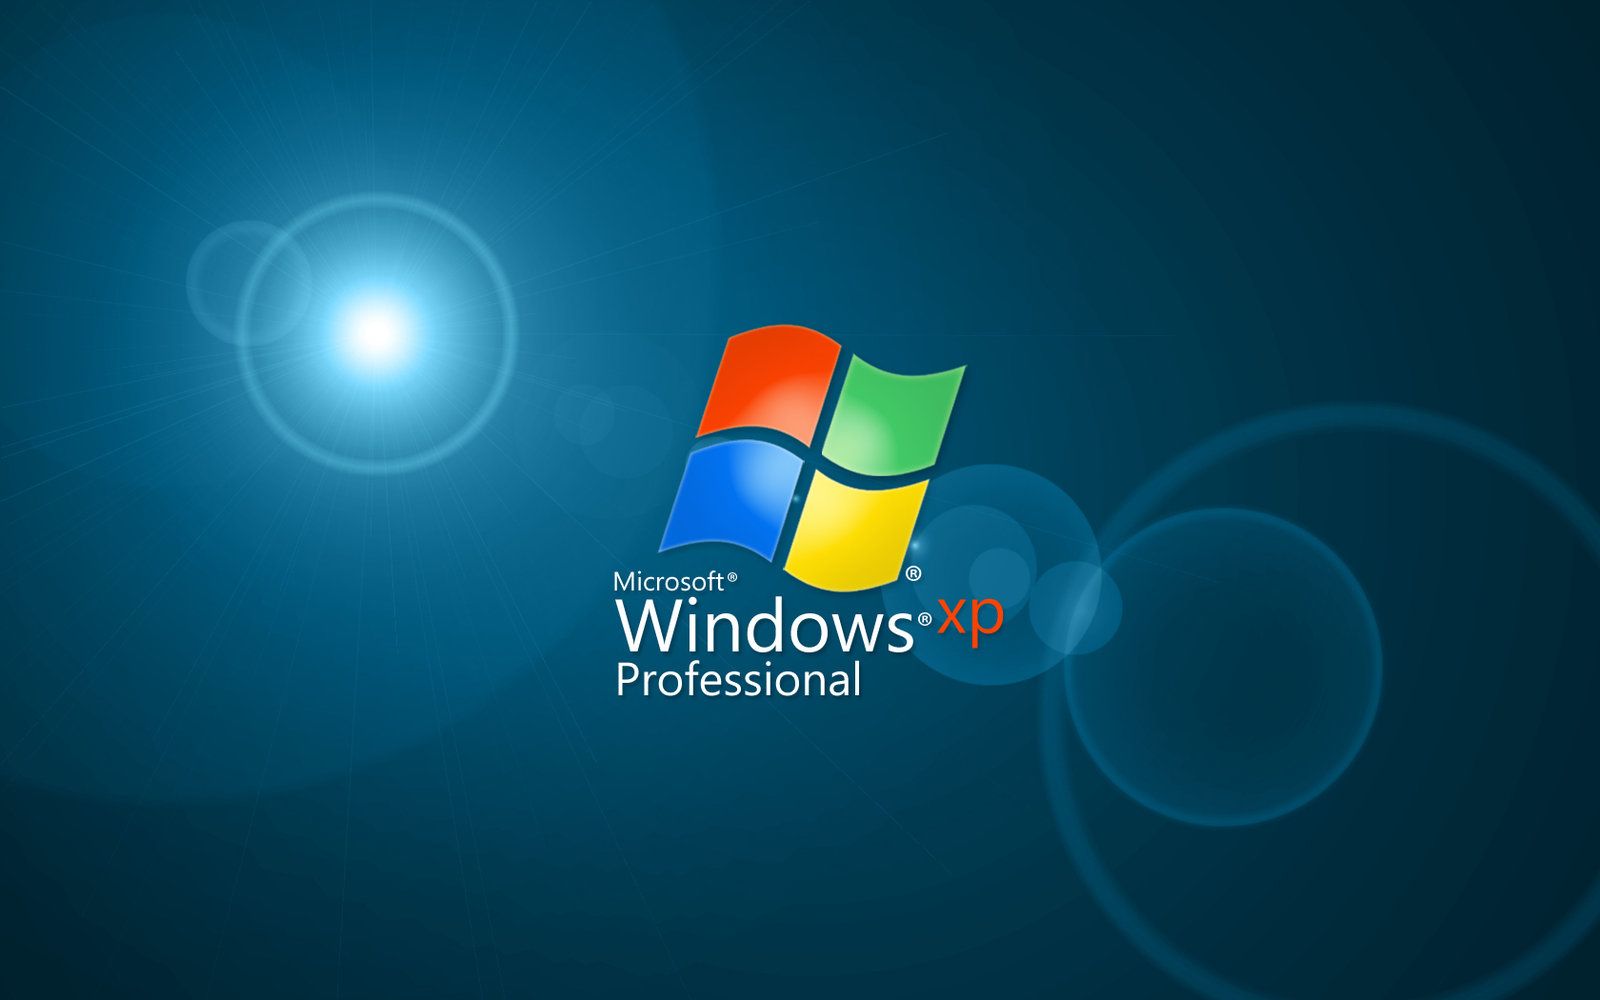 Wallpapers For Windows Xp - Wallpaper Cave